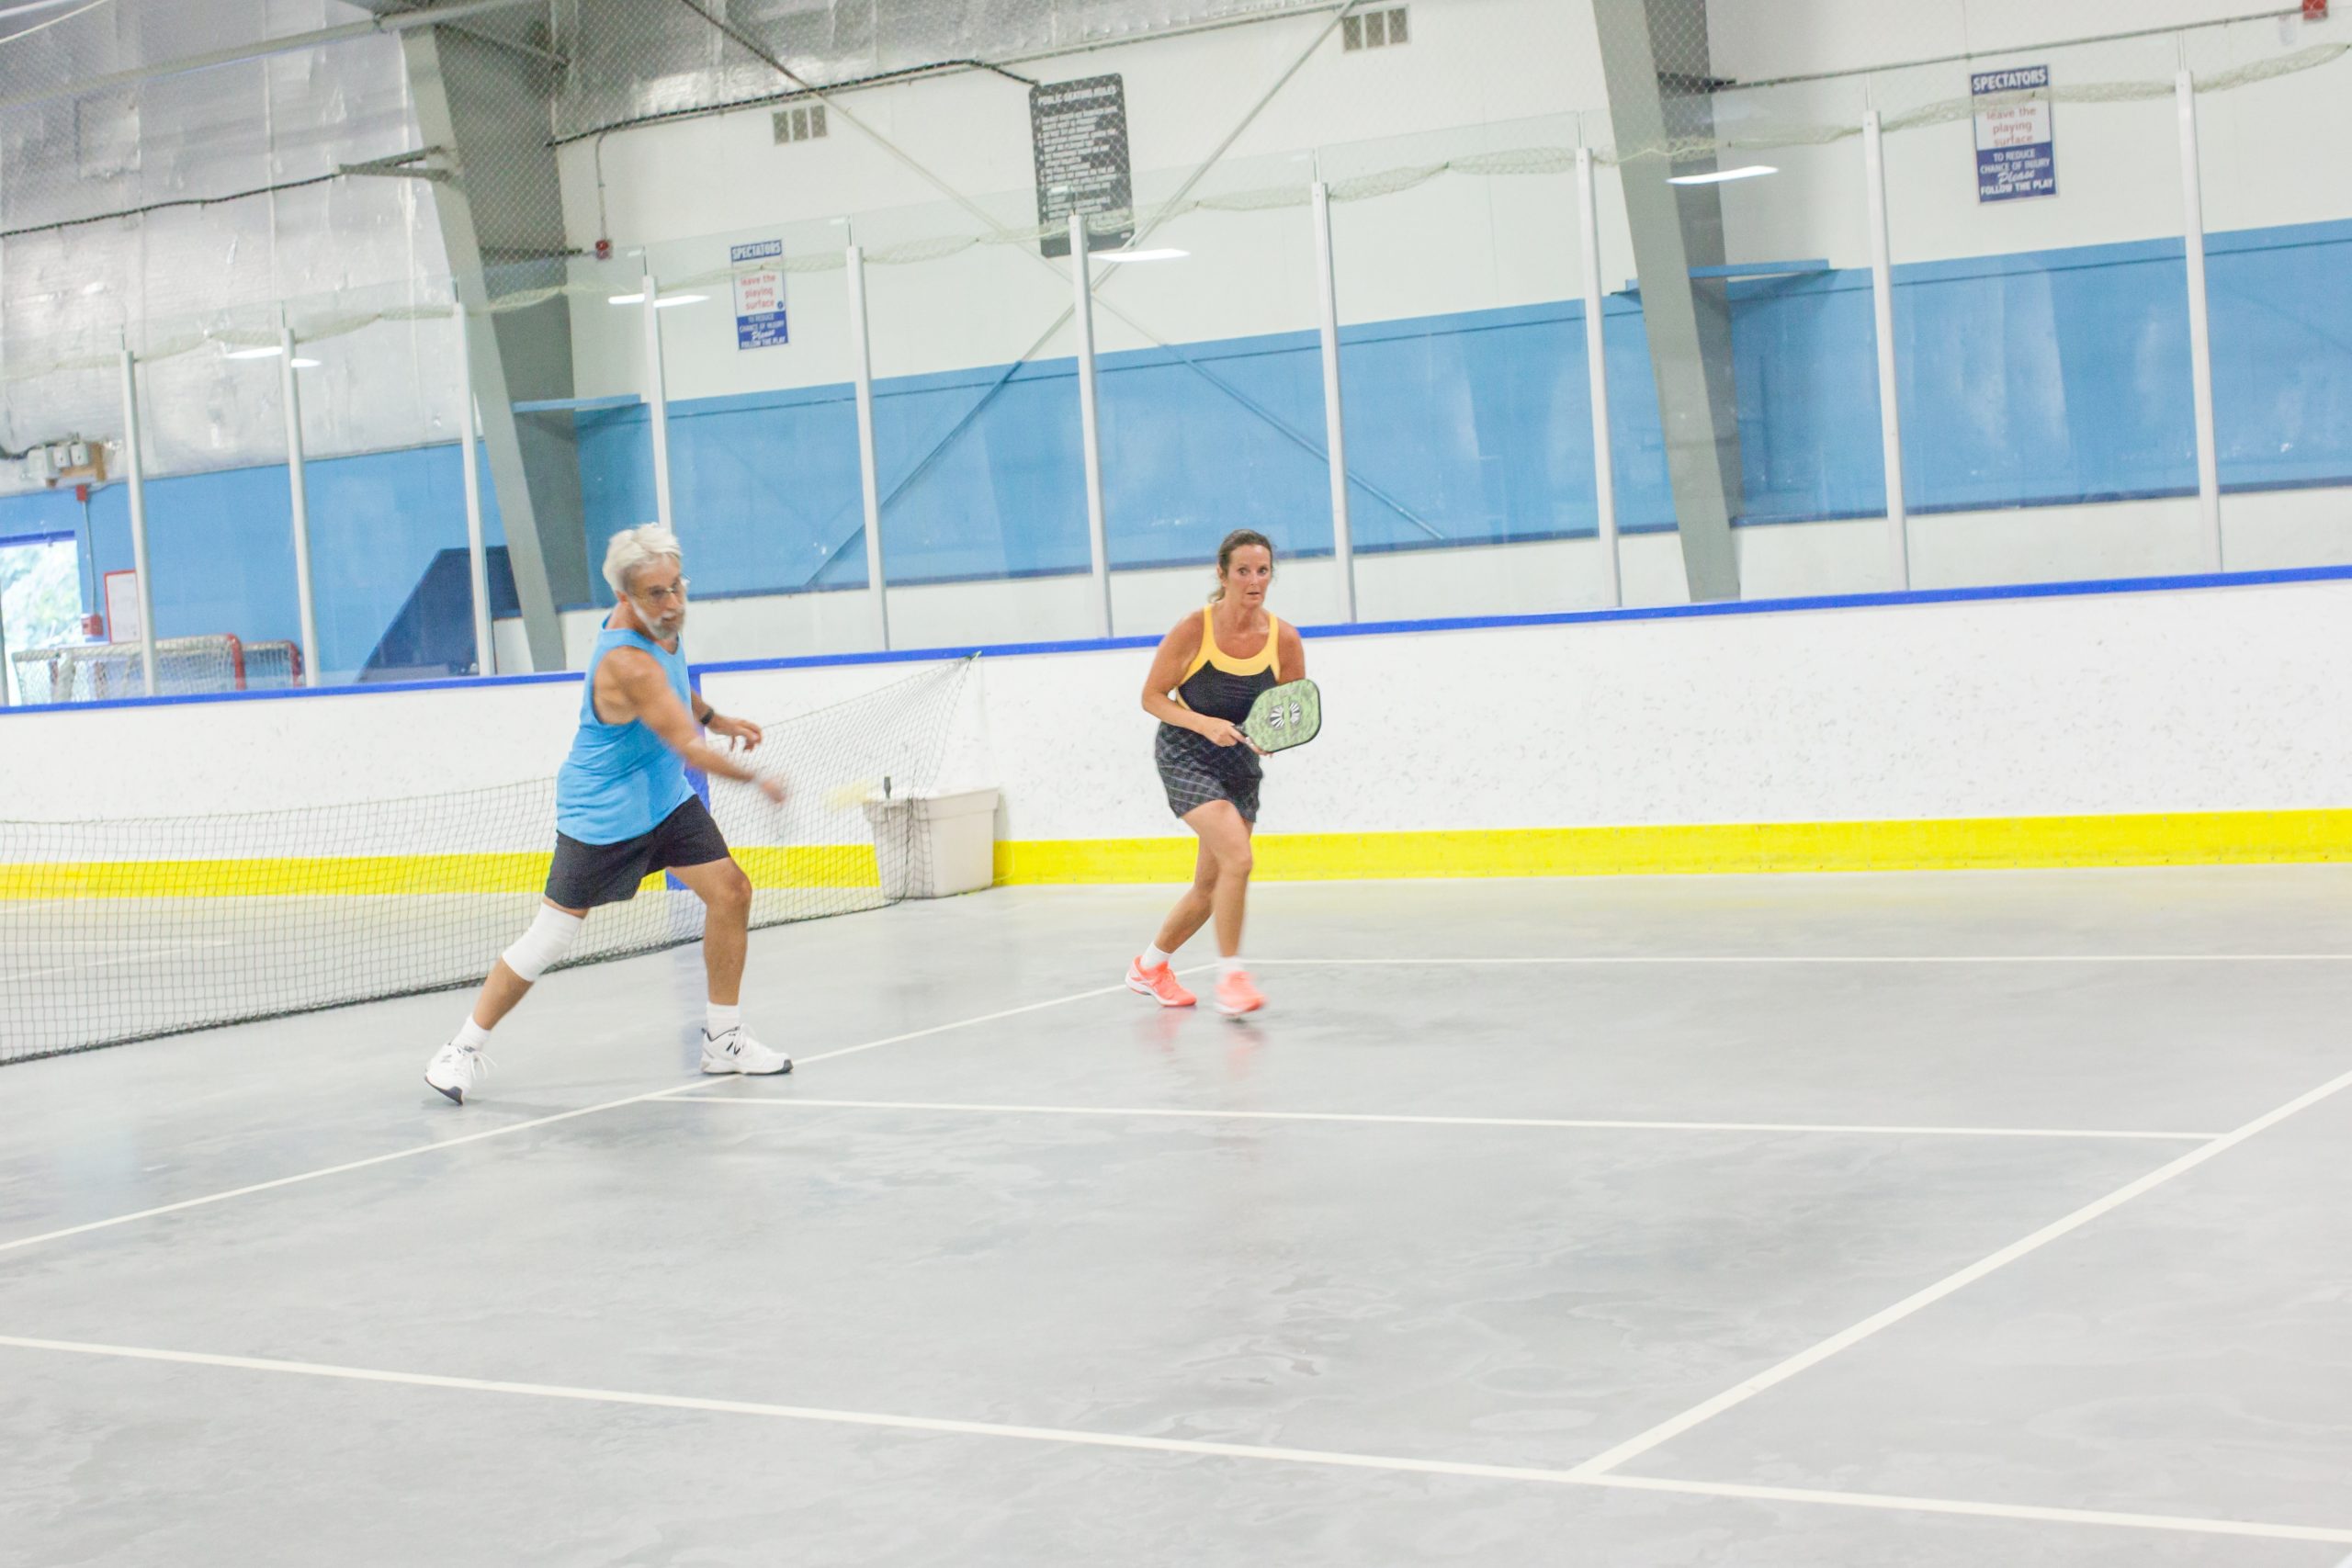 two people playing pickleball